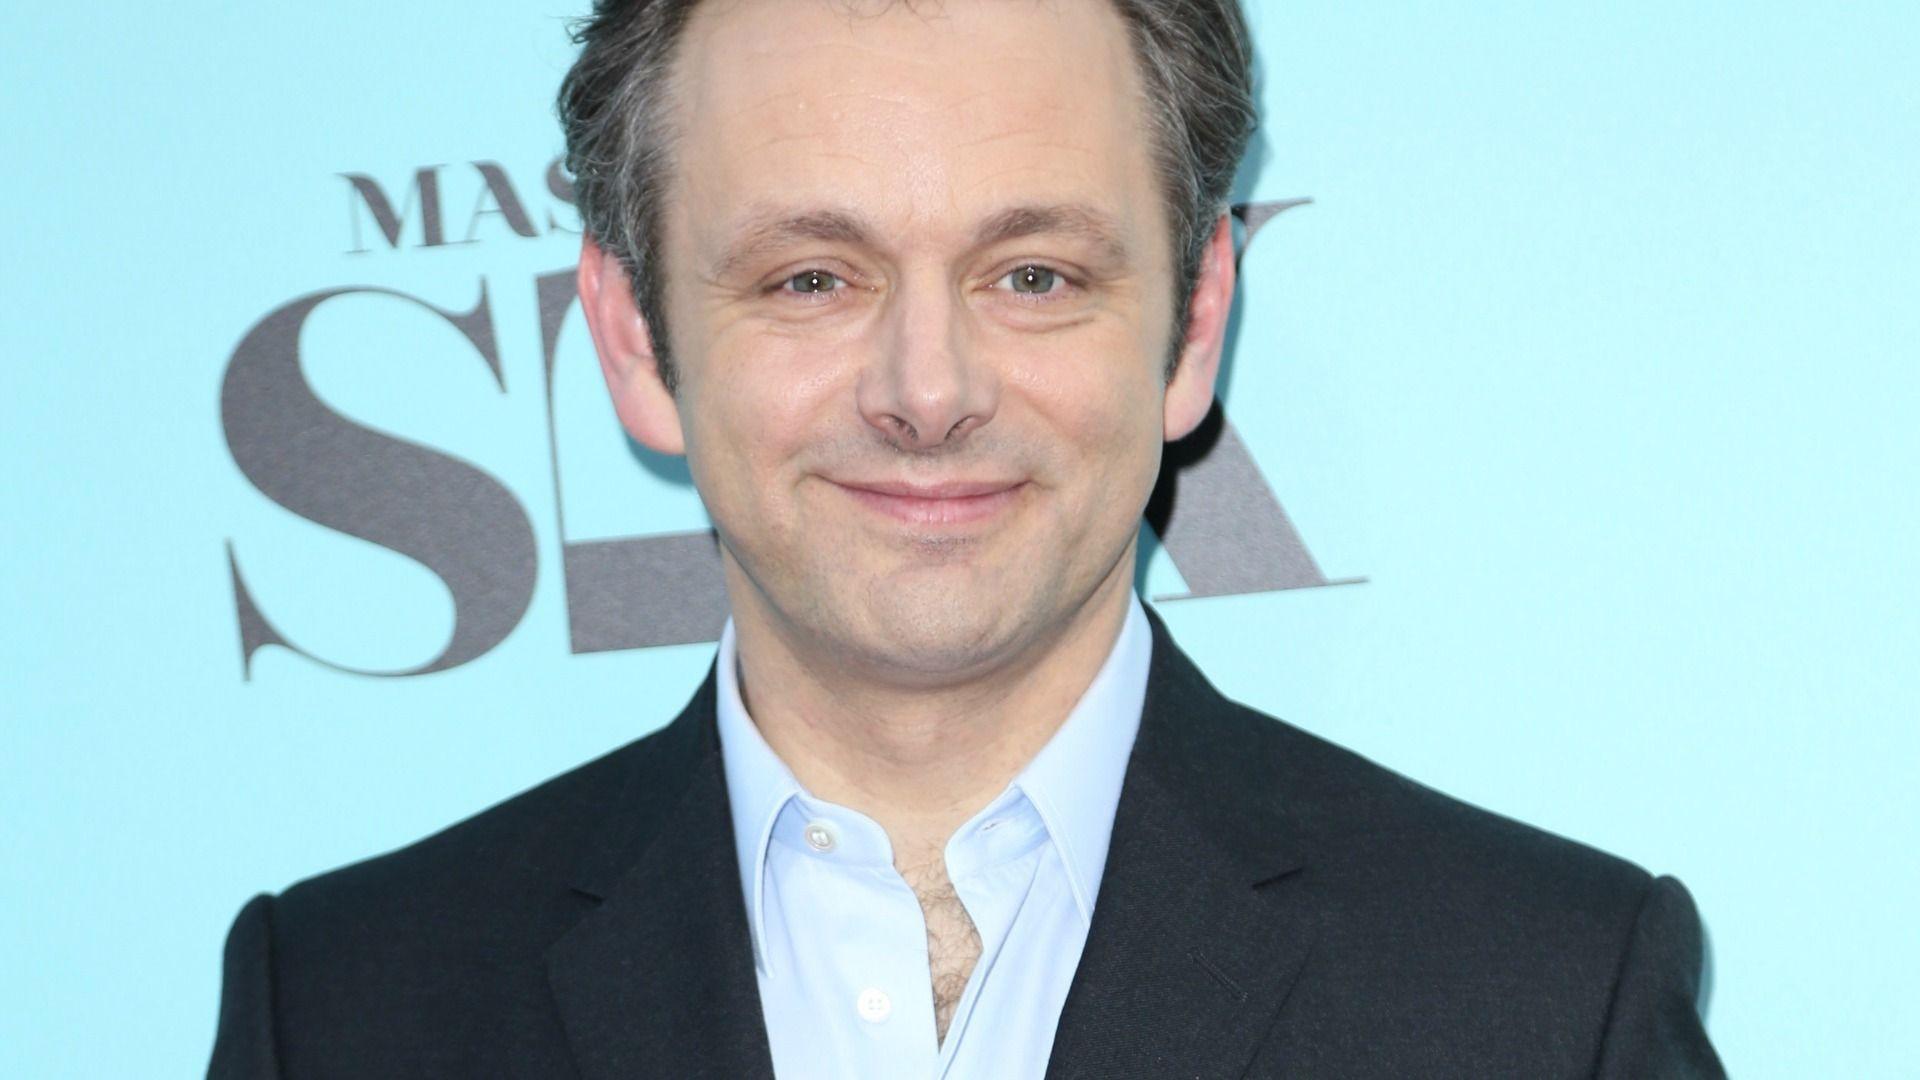 Michael Sheen Wallpaper Image Photo Picture Background